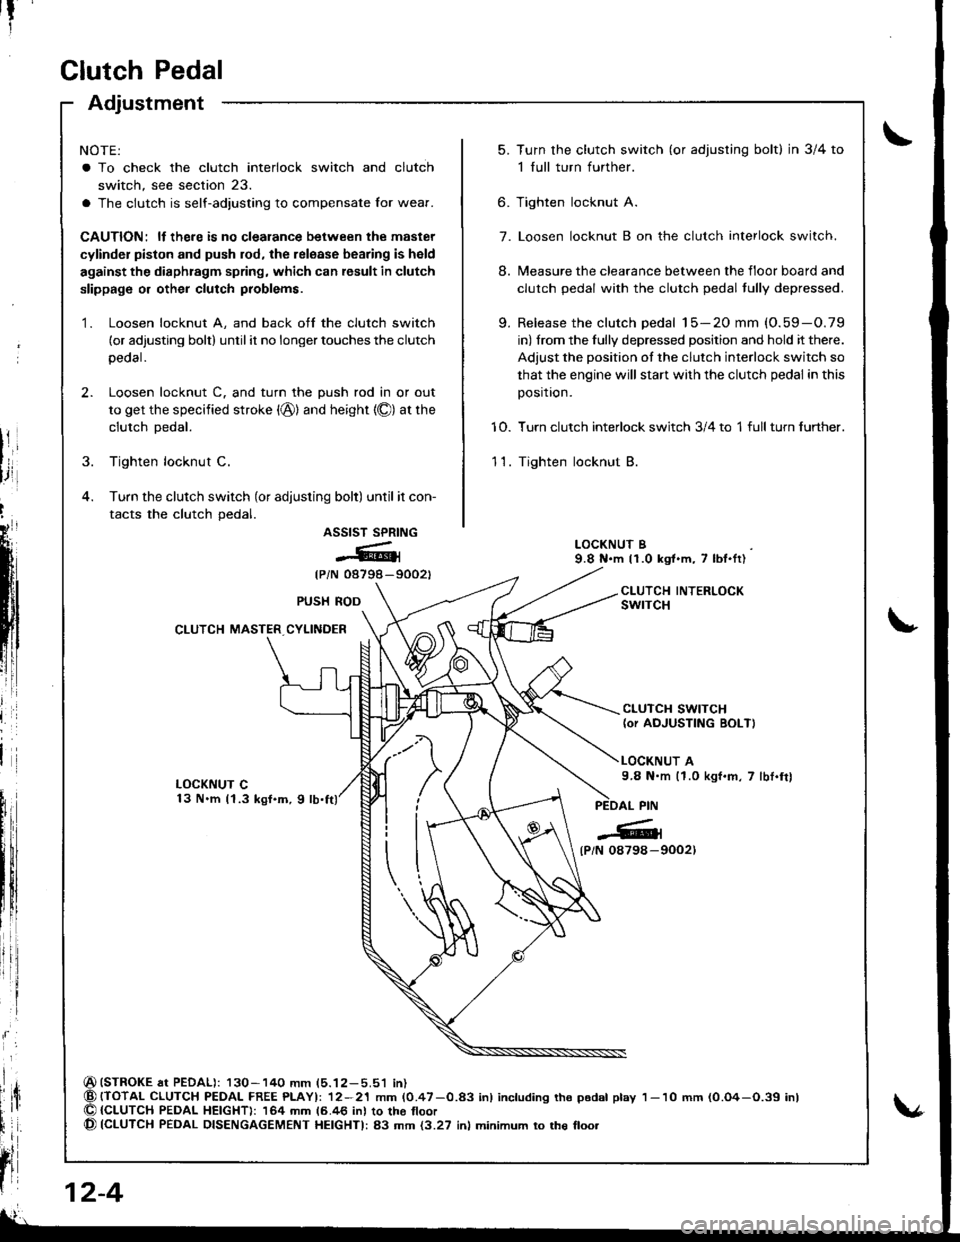 HONDA INTEGRA 1998 4.G Workshop Manual Clutch Pedal
Adjustment
NOTE:
a To check the clutch interlock switch and clutch
switch, see section 23.
a The clutch is self-adjusting to compensate Ior wear.
CAUTION: ll there is no clealance between